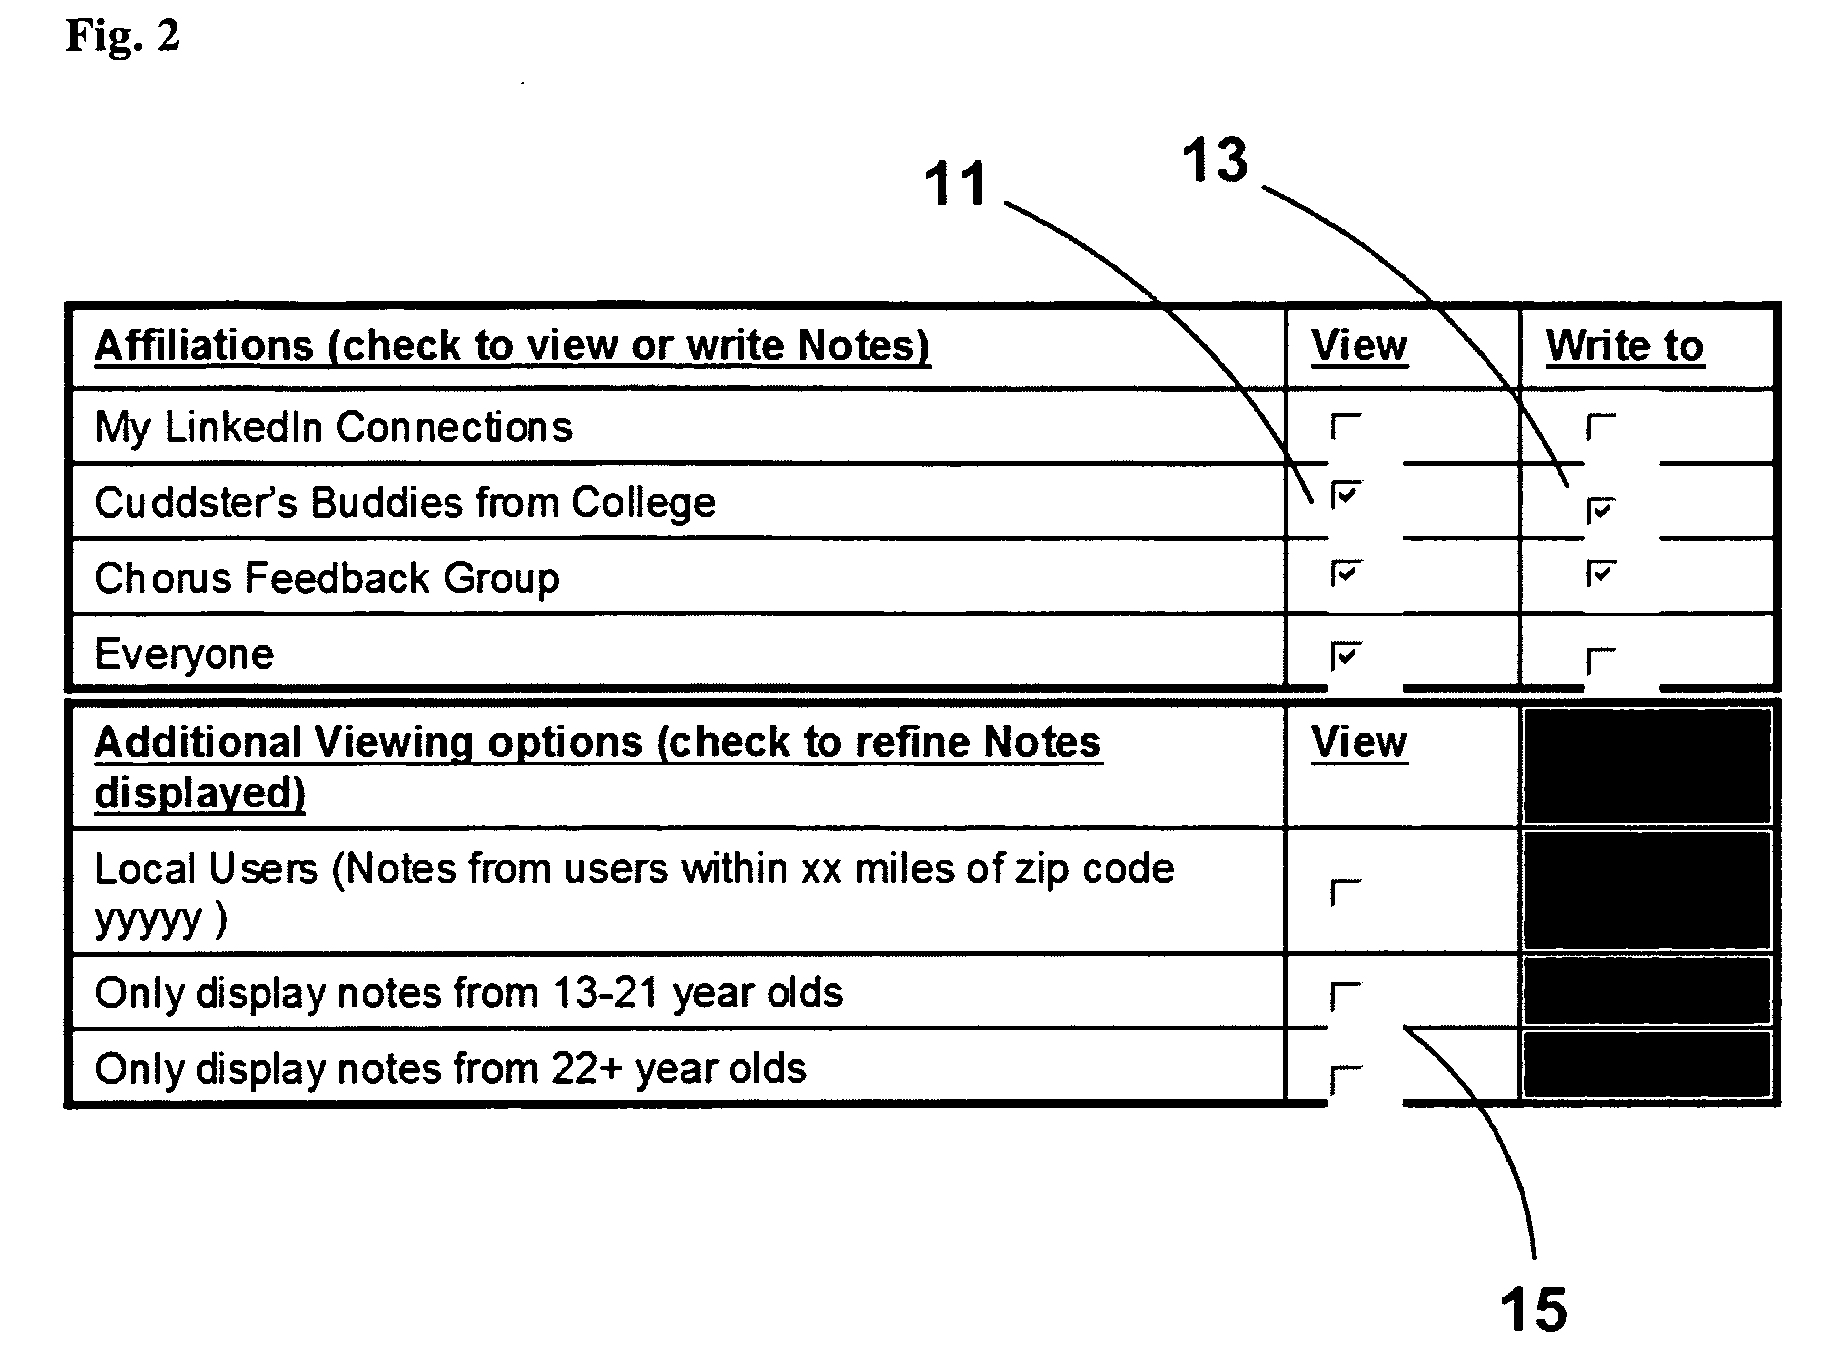 System and method to create, save, and display web annotations that are selectively shared within specified online communities